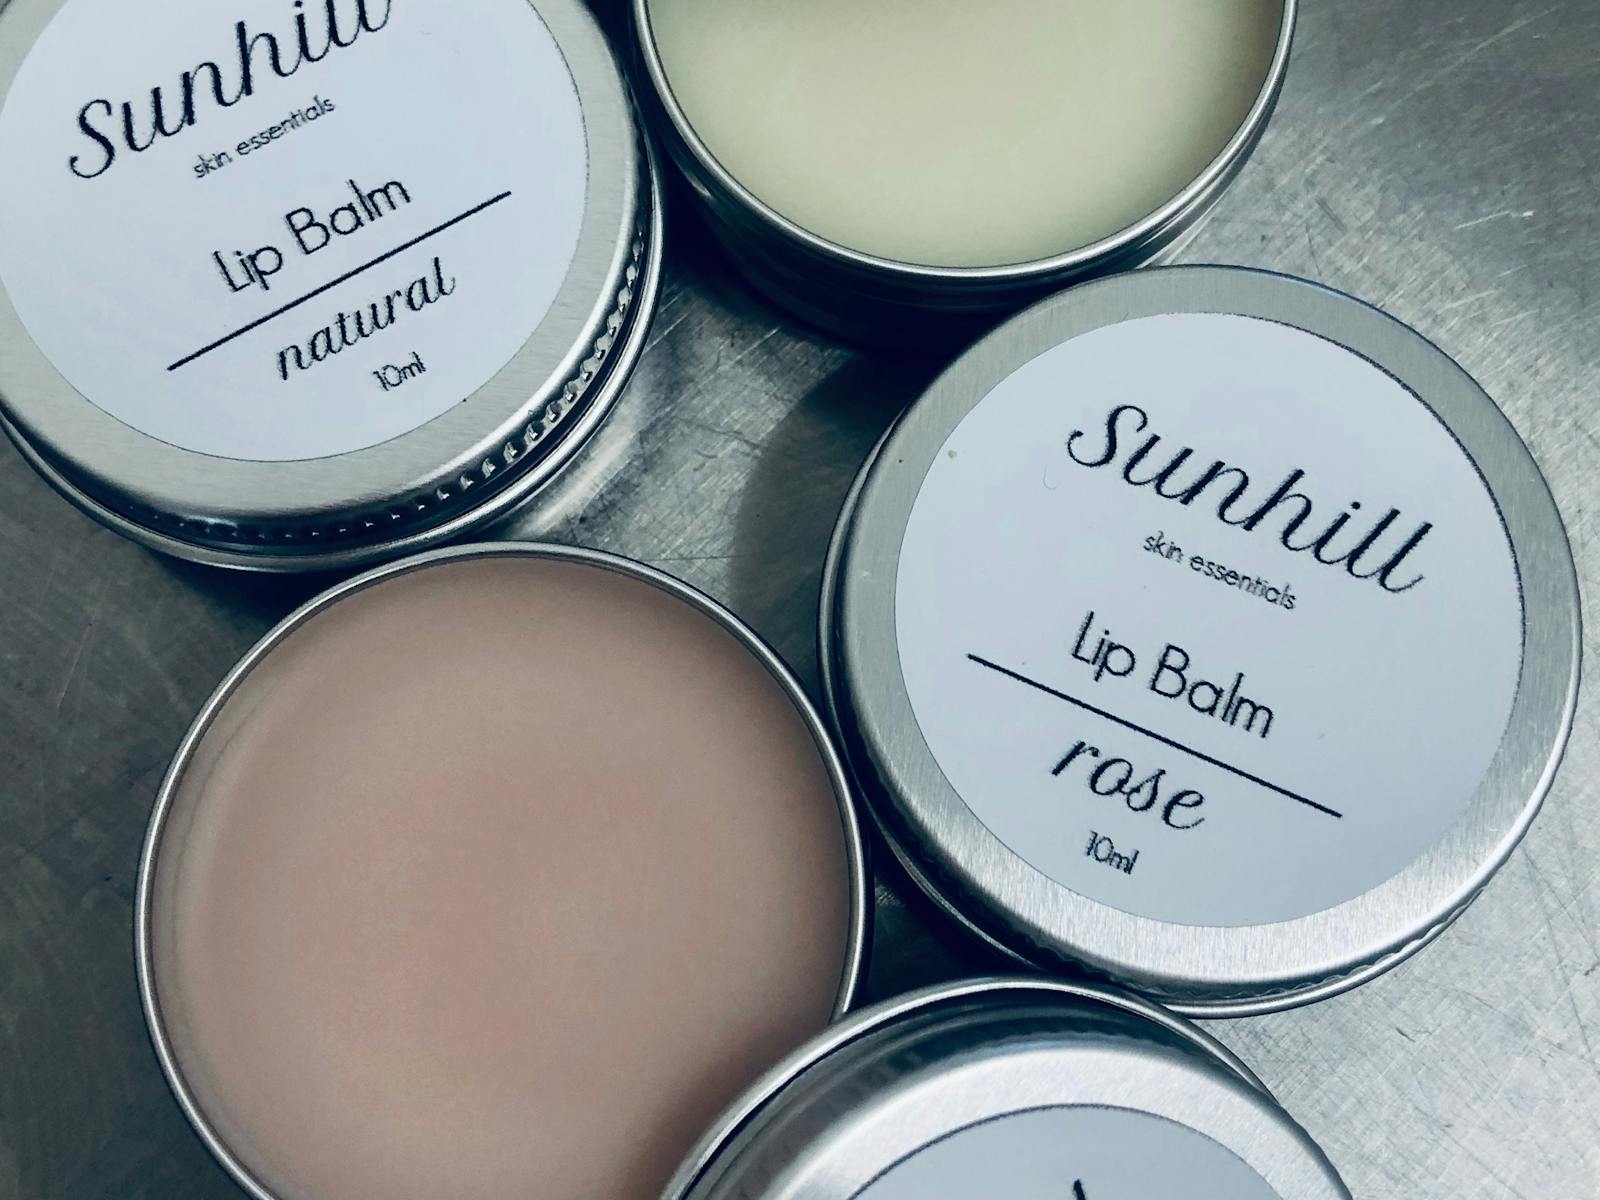 Sunhill Skin Essentials - Lip Balm in Natural and Rose